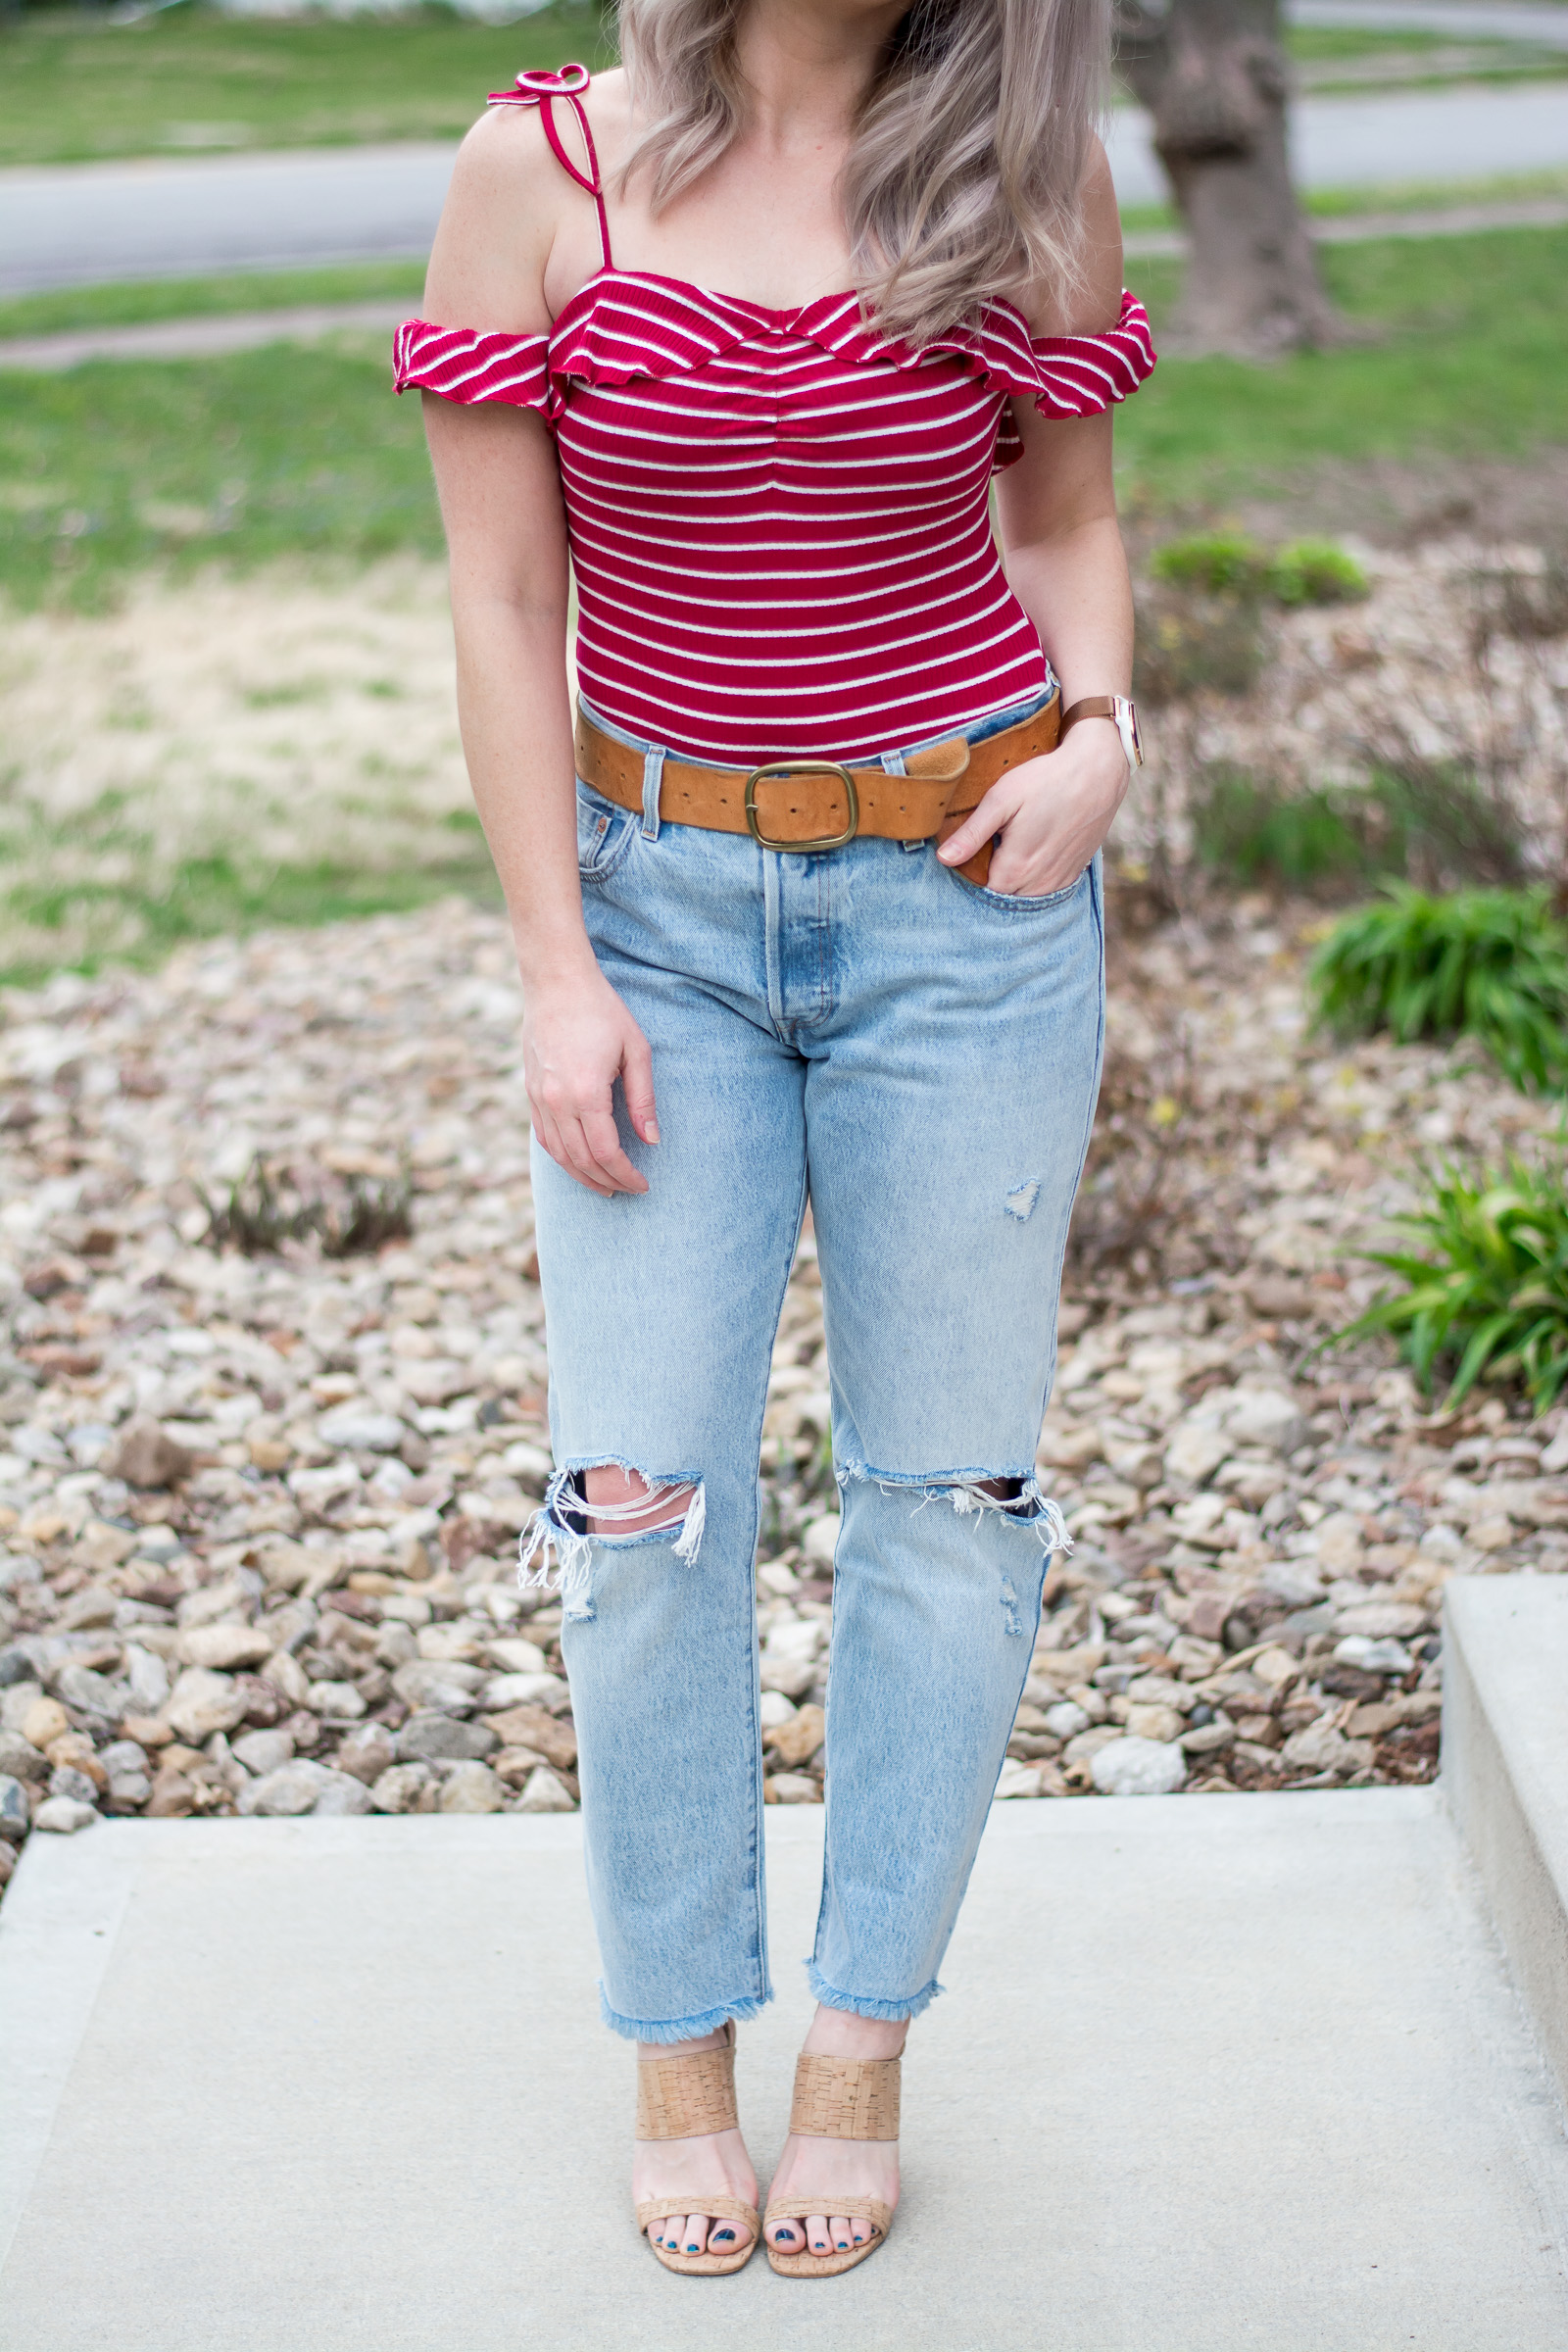 Rocking a Red Striped Bodysuit with Kindred. | Le Stylo Rouge